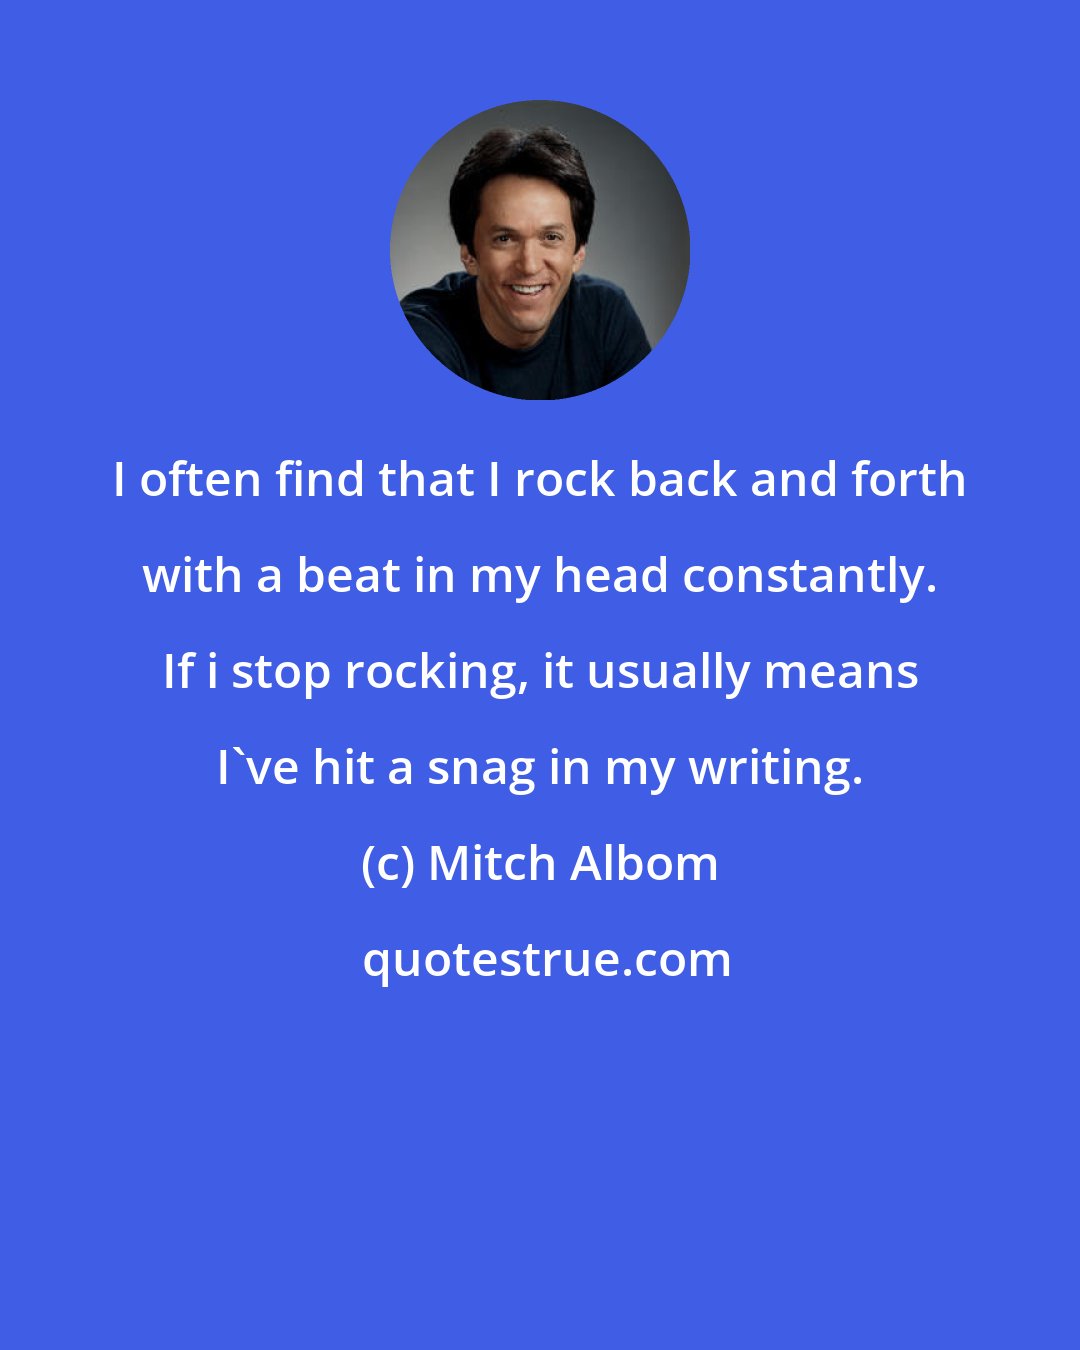 Mitch Albom: I often find that I rock back and forth with a beat in my head constantly. If i stop rocking, it usually means I've hit a snag in my writing.